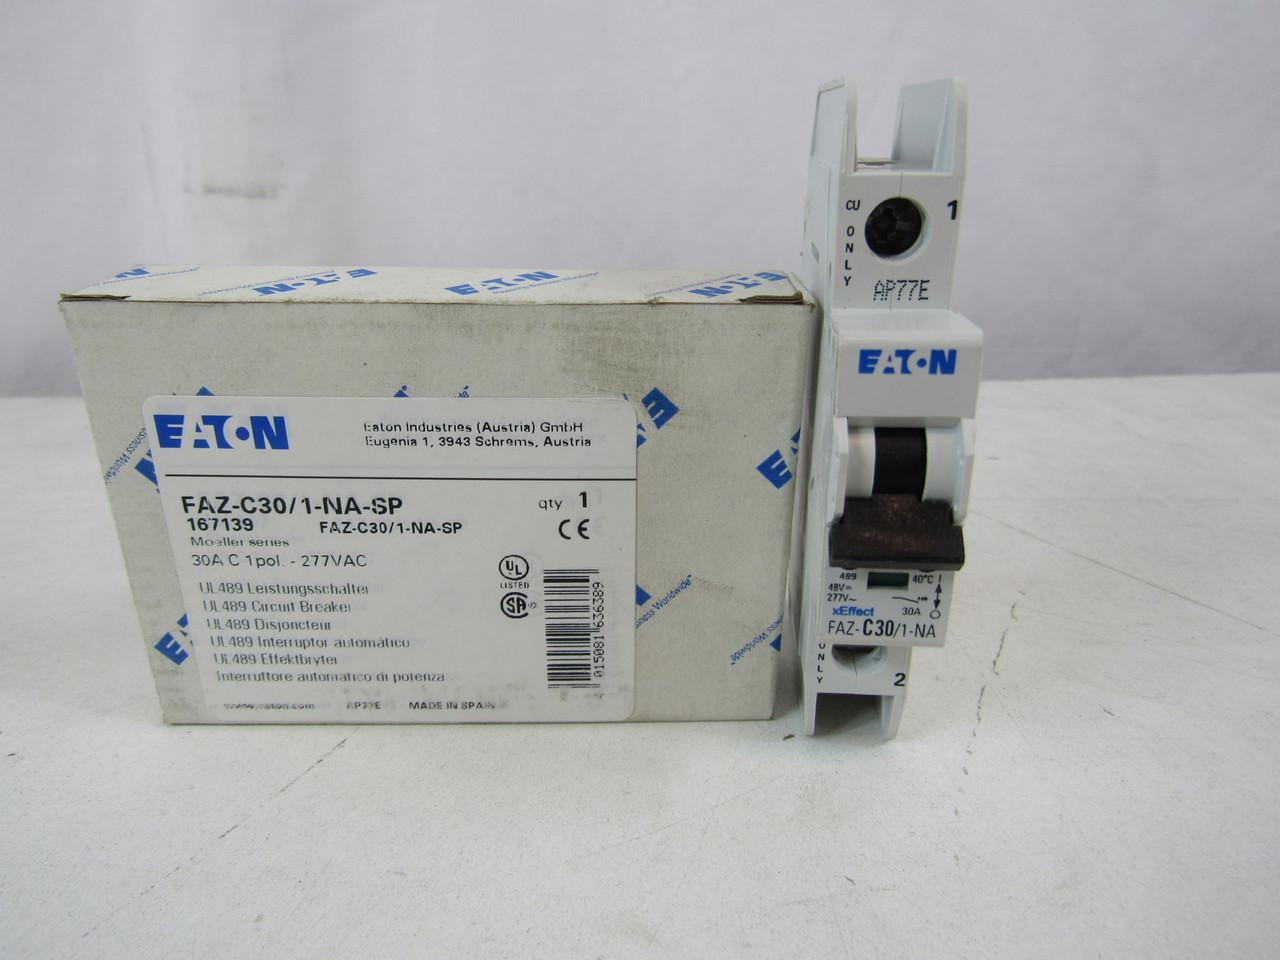 Eaton FAZ-C30/1-NA-SP Eaton FAZ branch protector,UL 489 Industrial miniature circuit breaker - supplementary protector,Single package,Medium levels of inrush current are expected,30 A,10 kAIC,Single-pole,277 V,5-10X /n,Q38,50-60 Hz,Screw terminals,C Curve